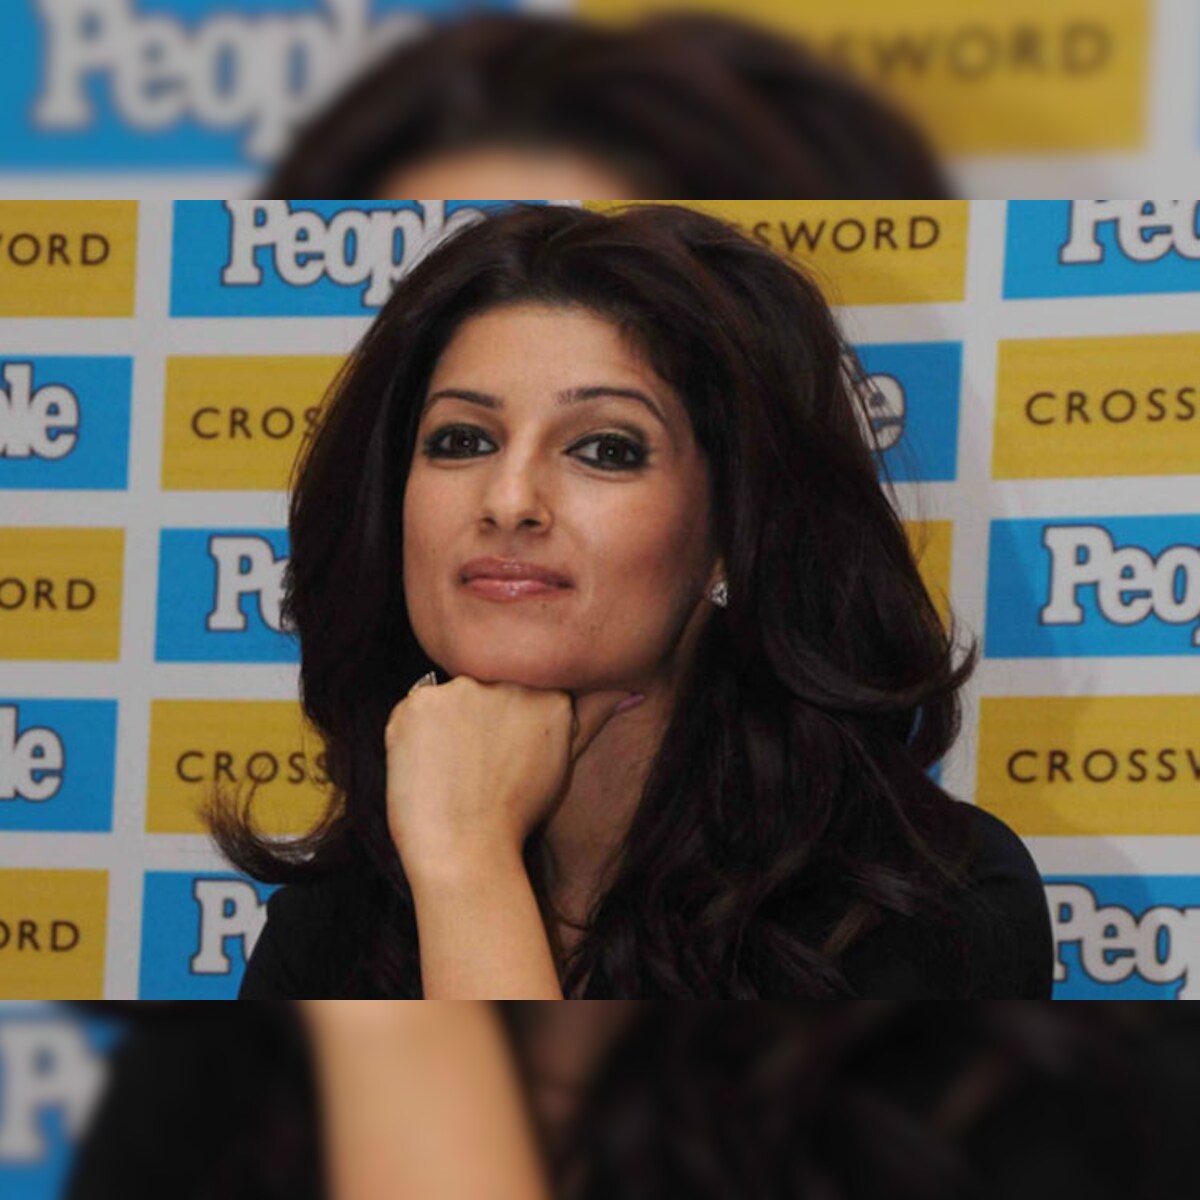 Being funny was more of a defense mechanism for me: Twinkle Khanna